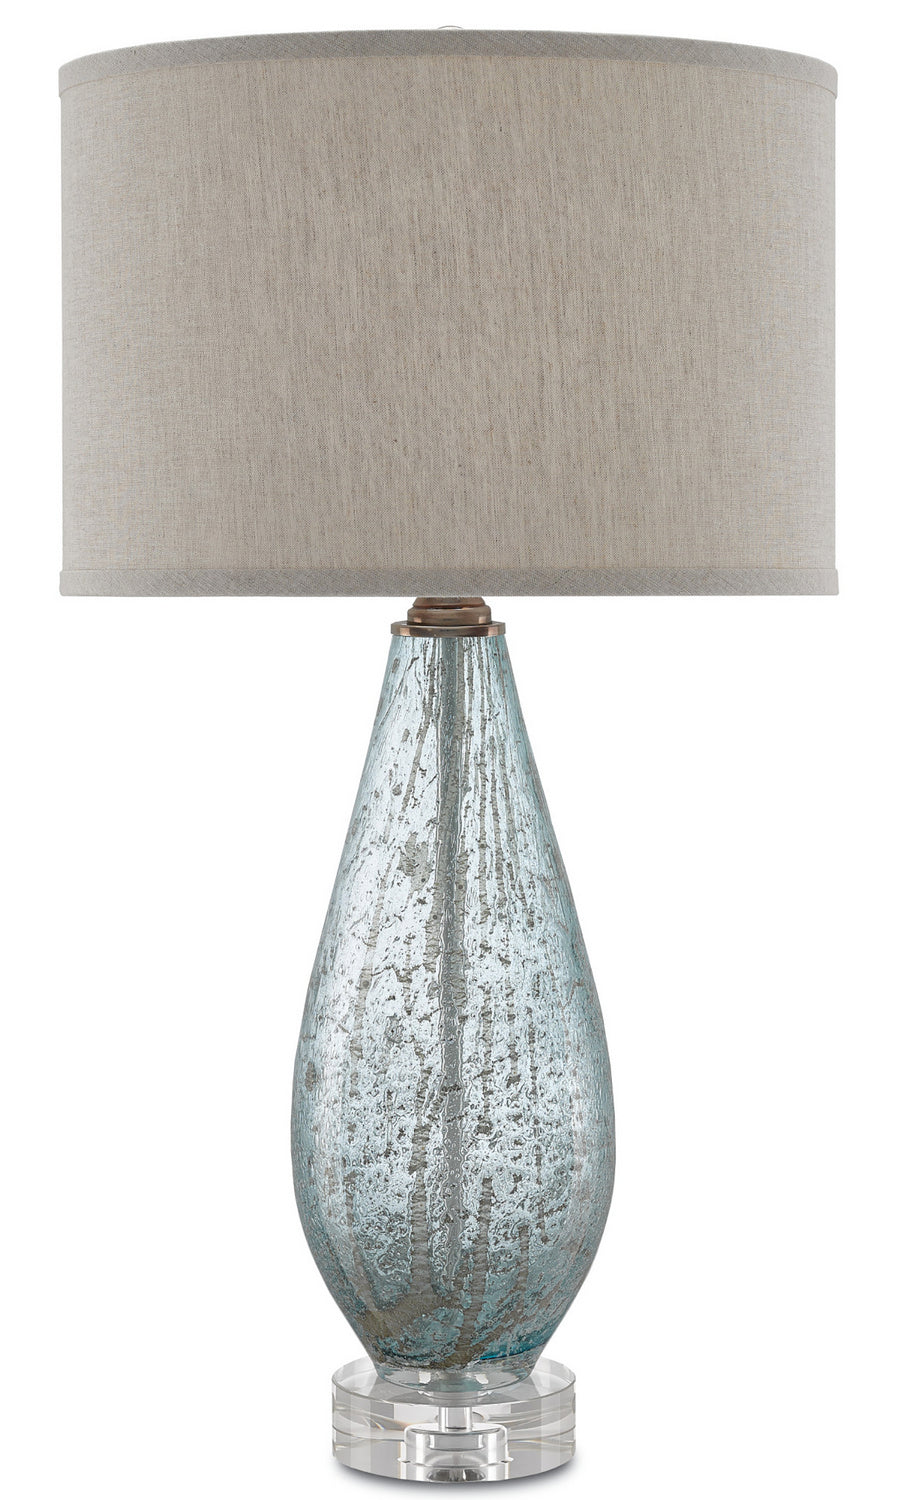 One Light Table Lamp from the Optimist collection in Pale Blue Speckle finish